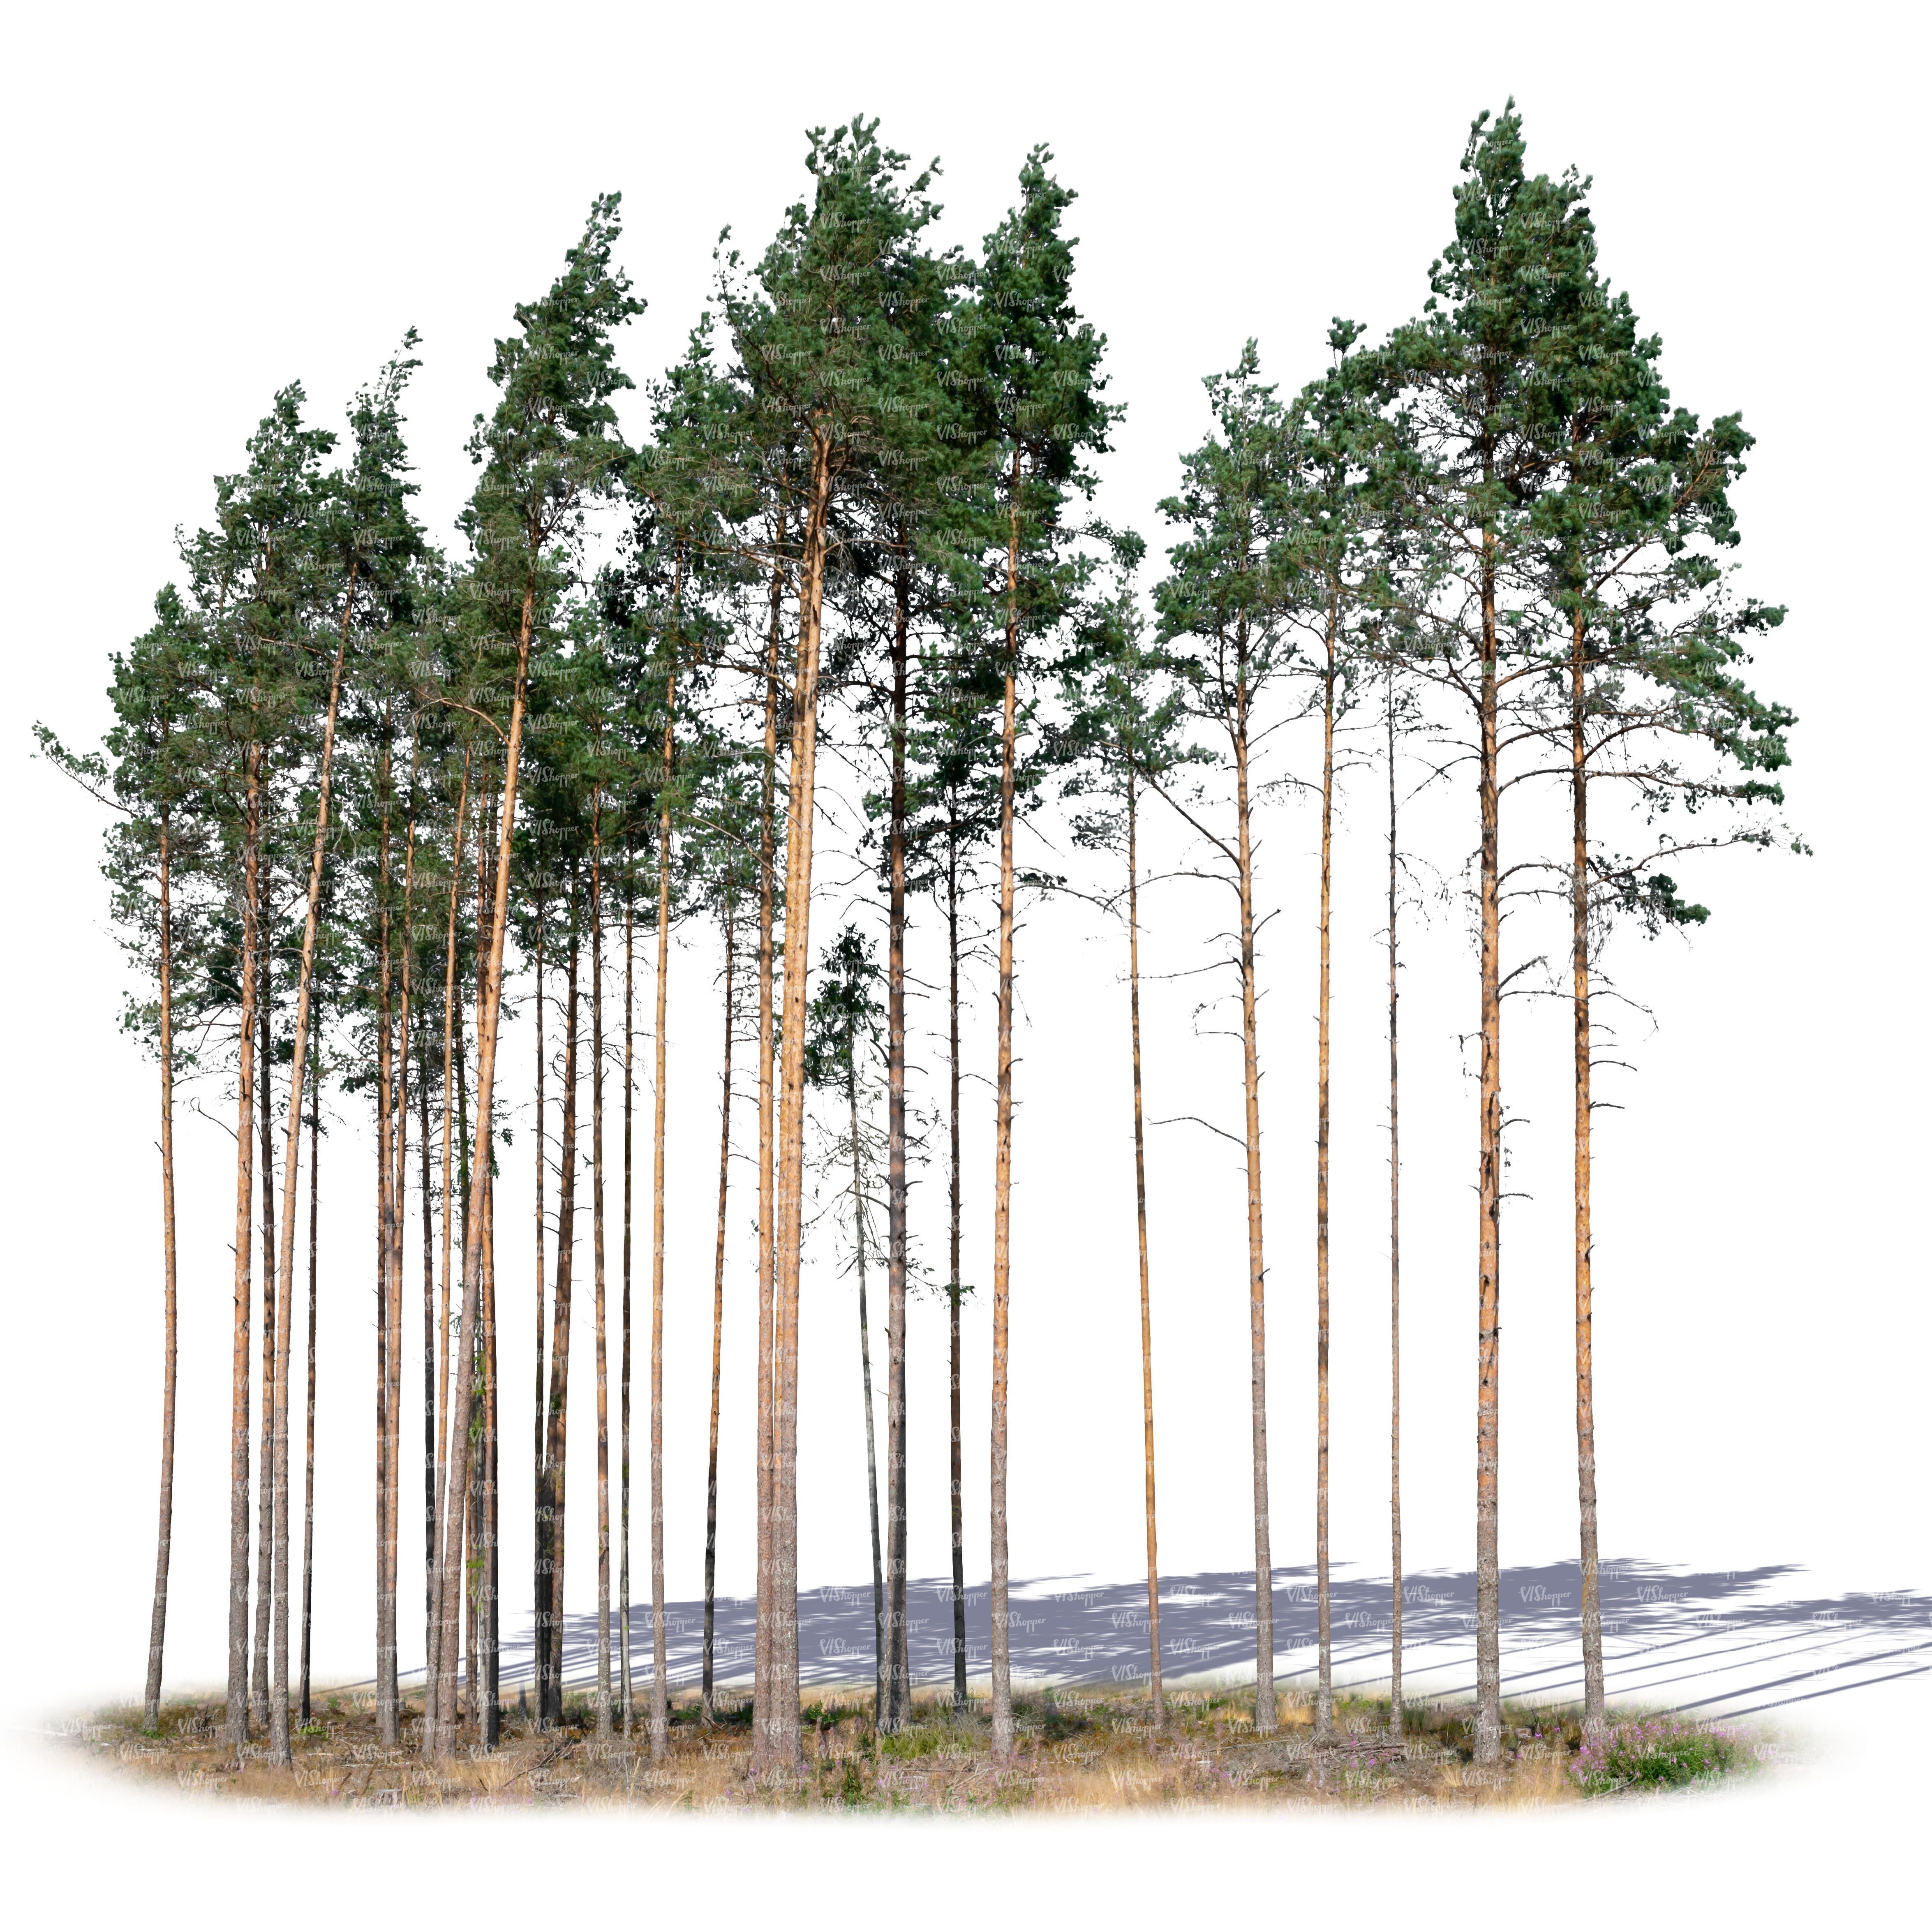 A cutout group of pine trees -   12 plants Painting trees ideas